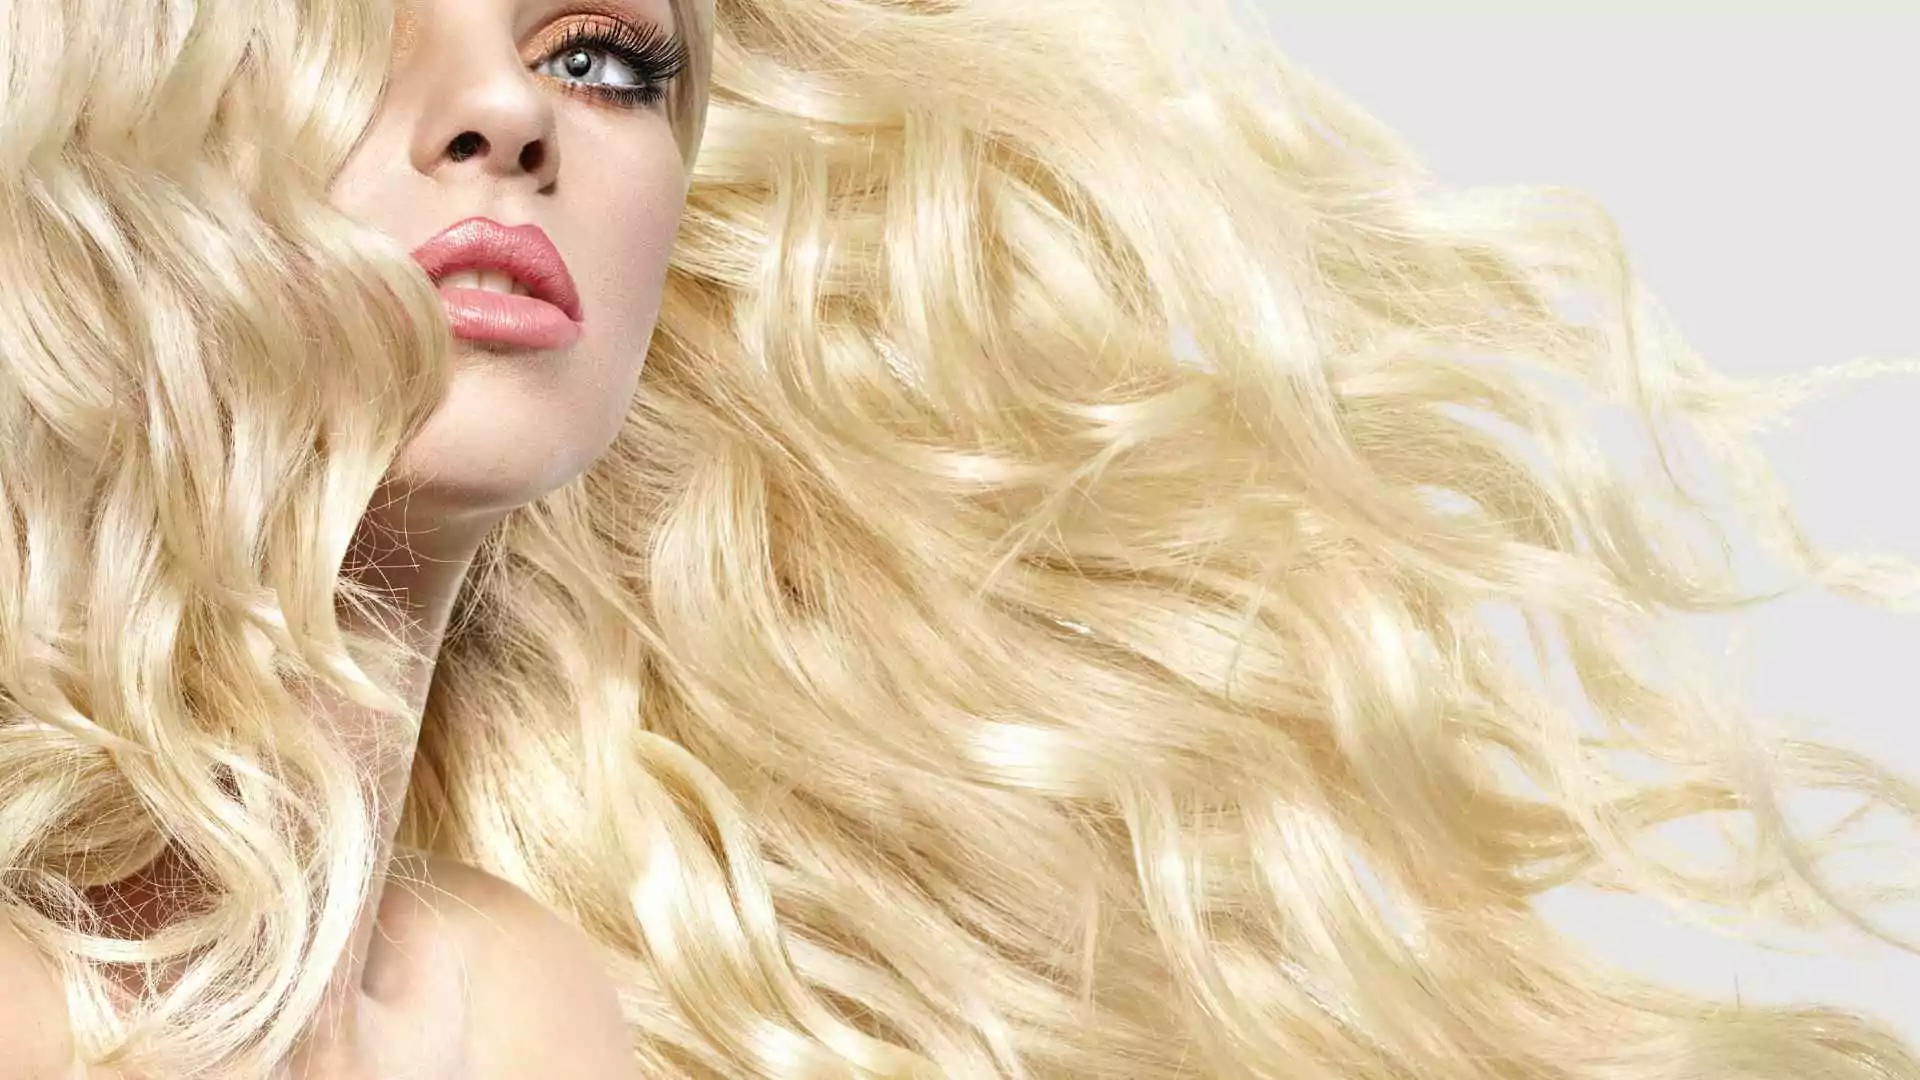 Female model with long bleached hair that is shiny and silky